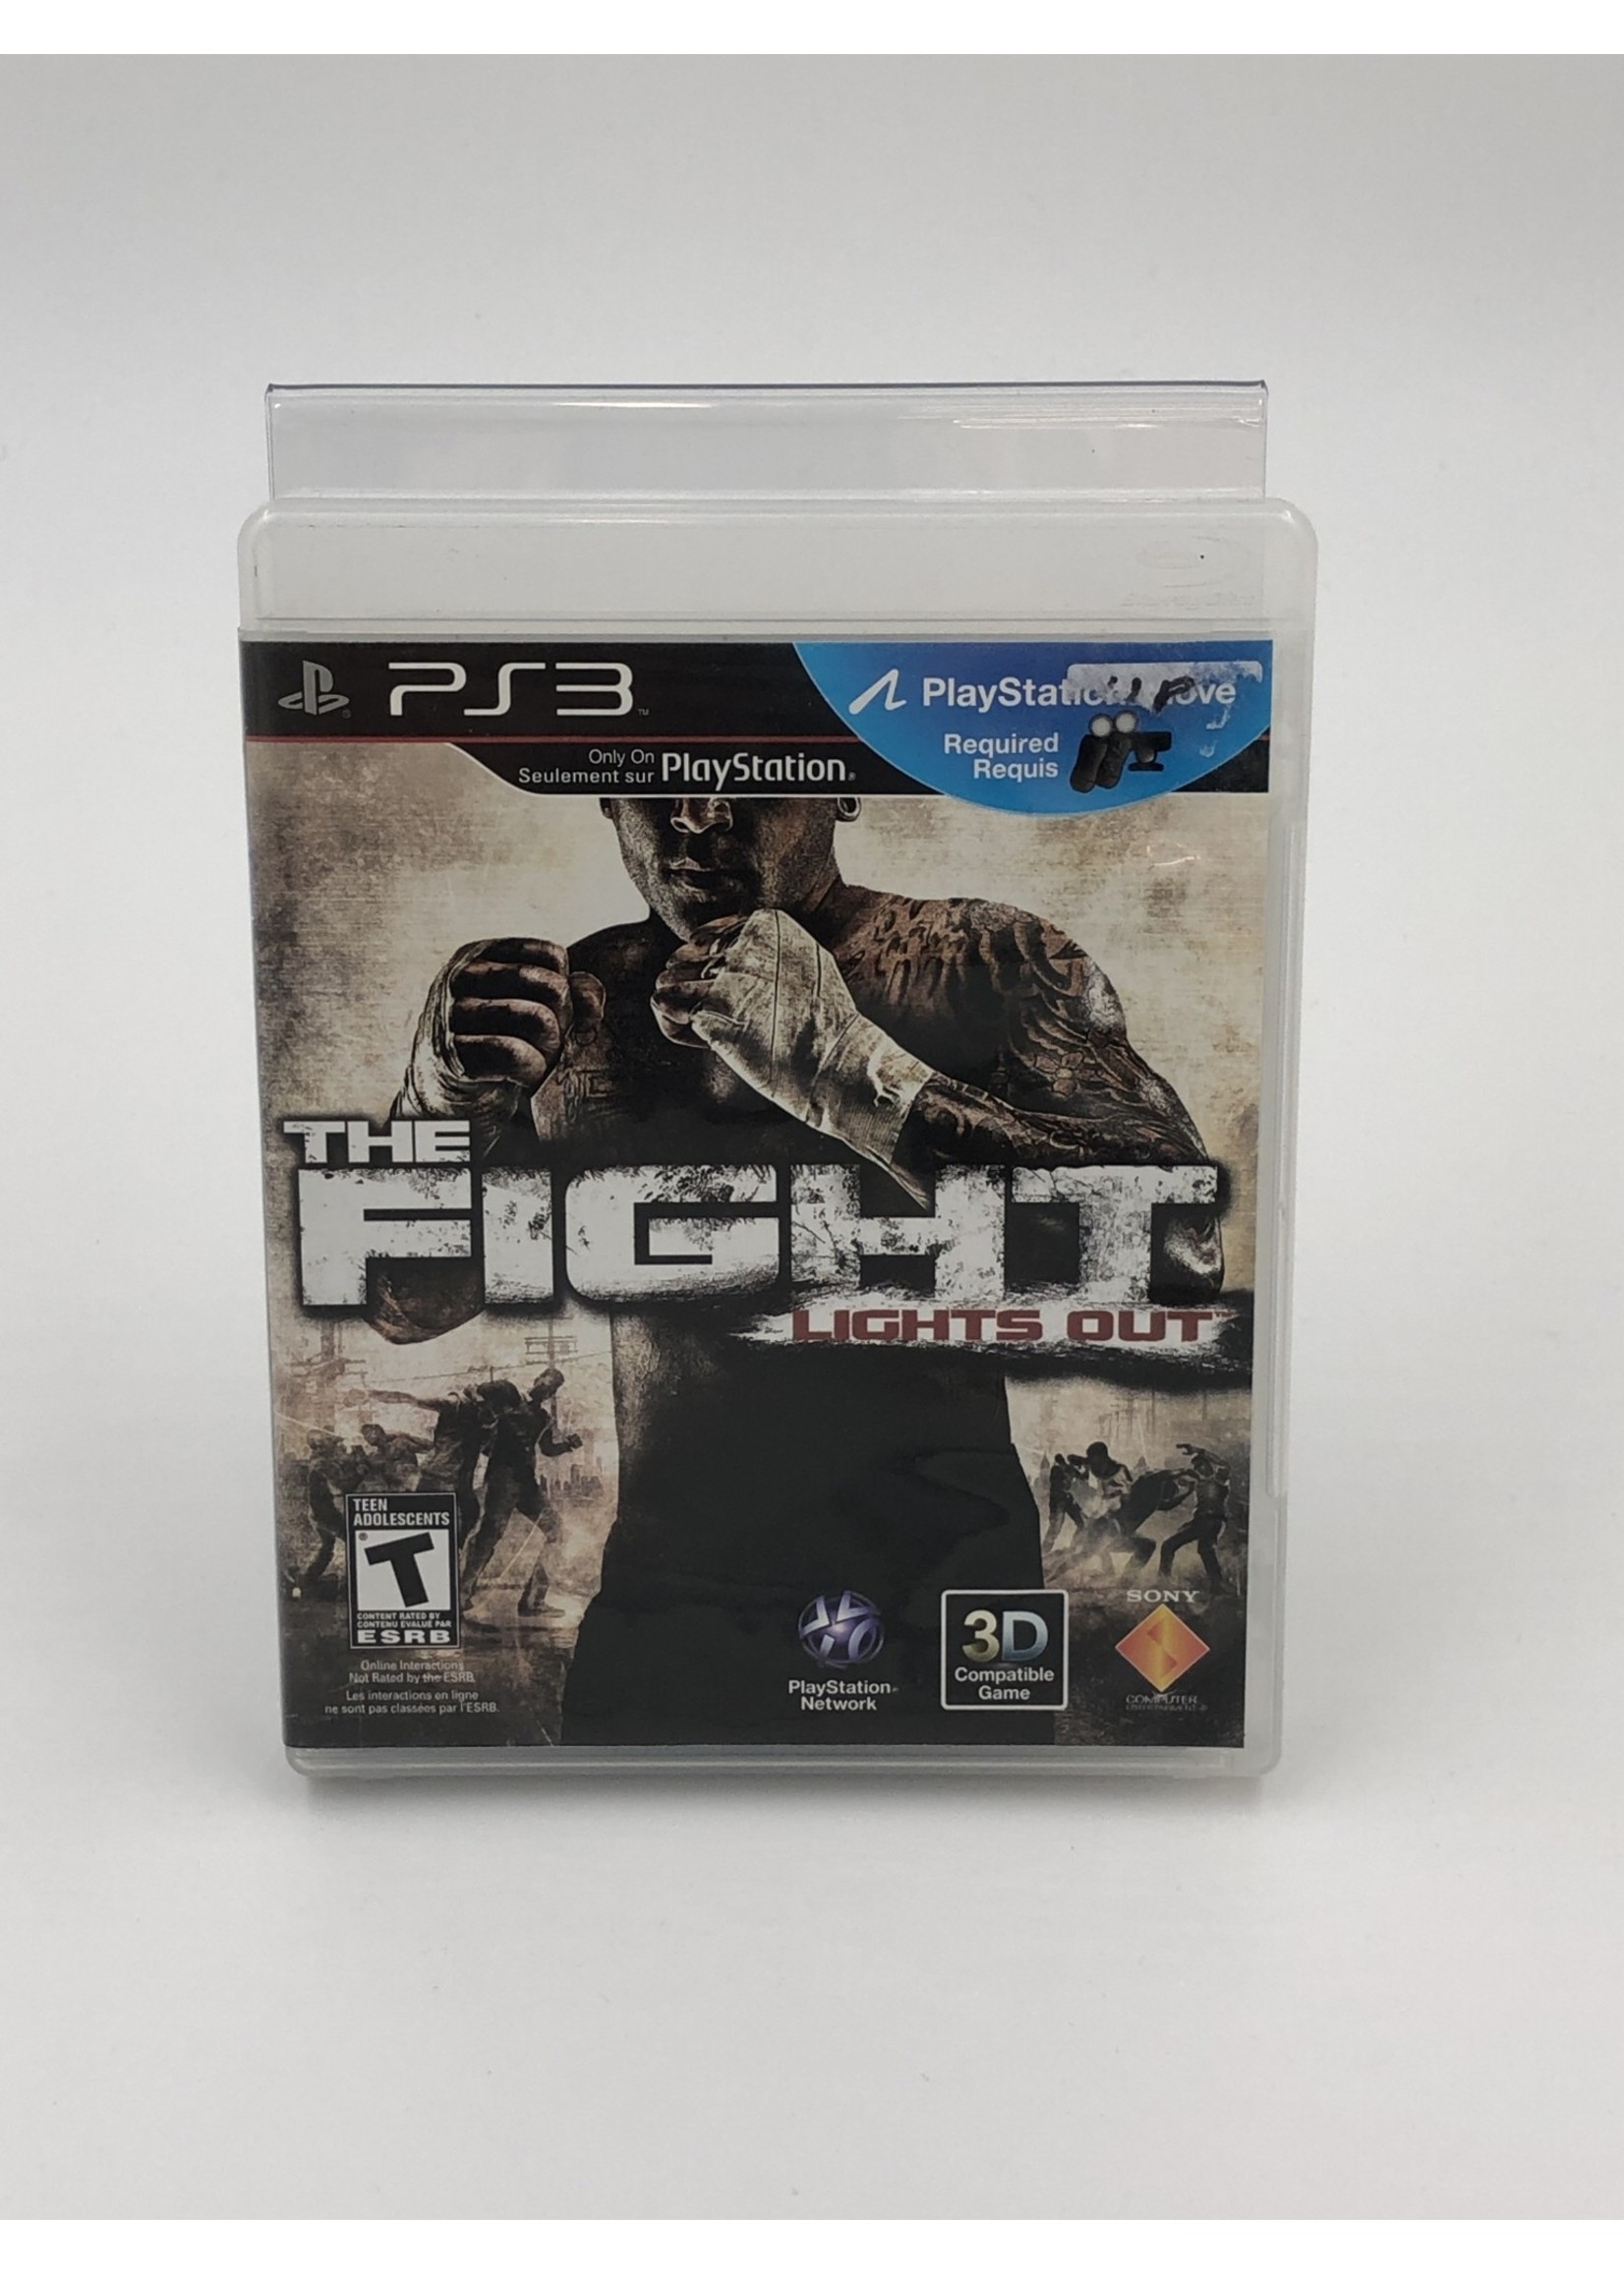 Sony   The Fight: Lights Out! - PS3